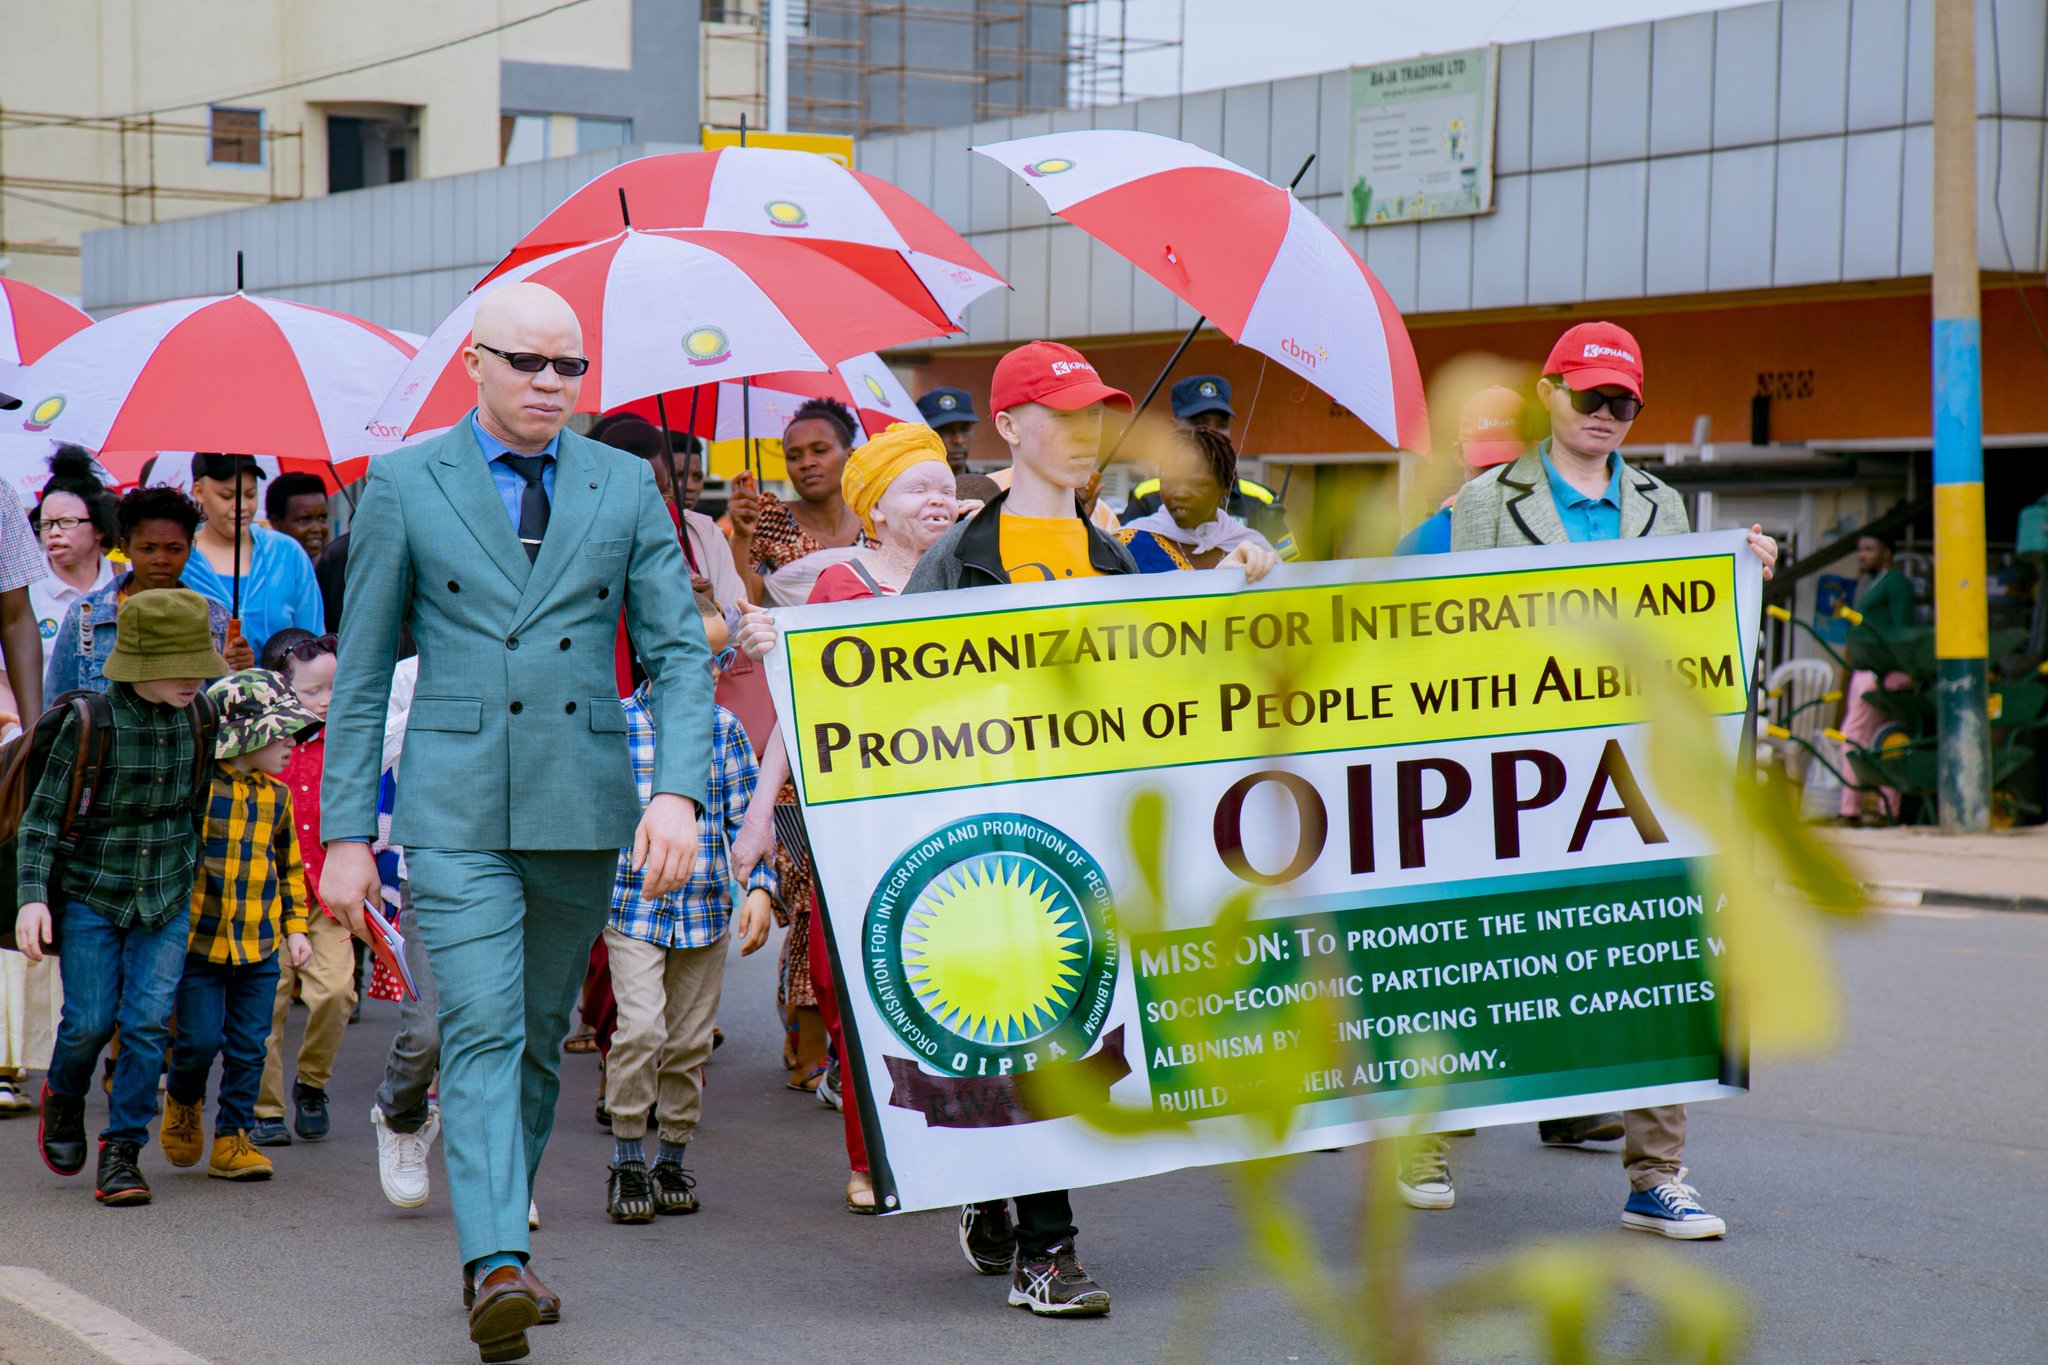 OIPPA members marching in Kigali with a banner.